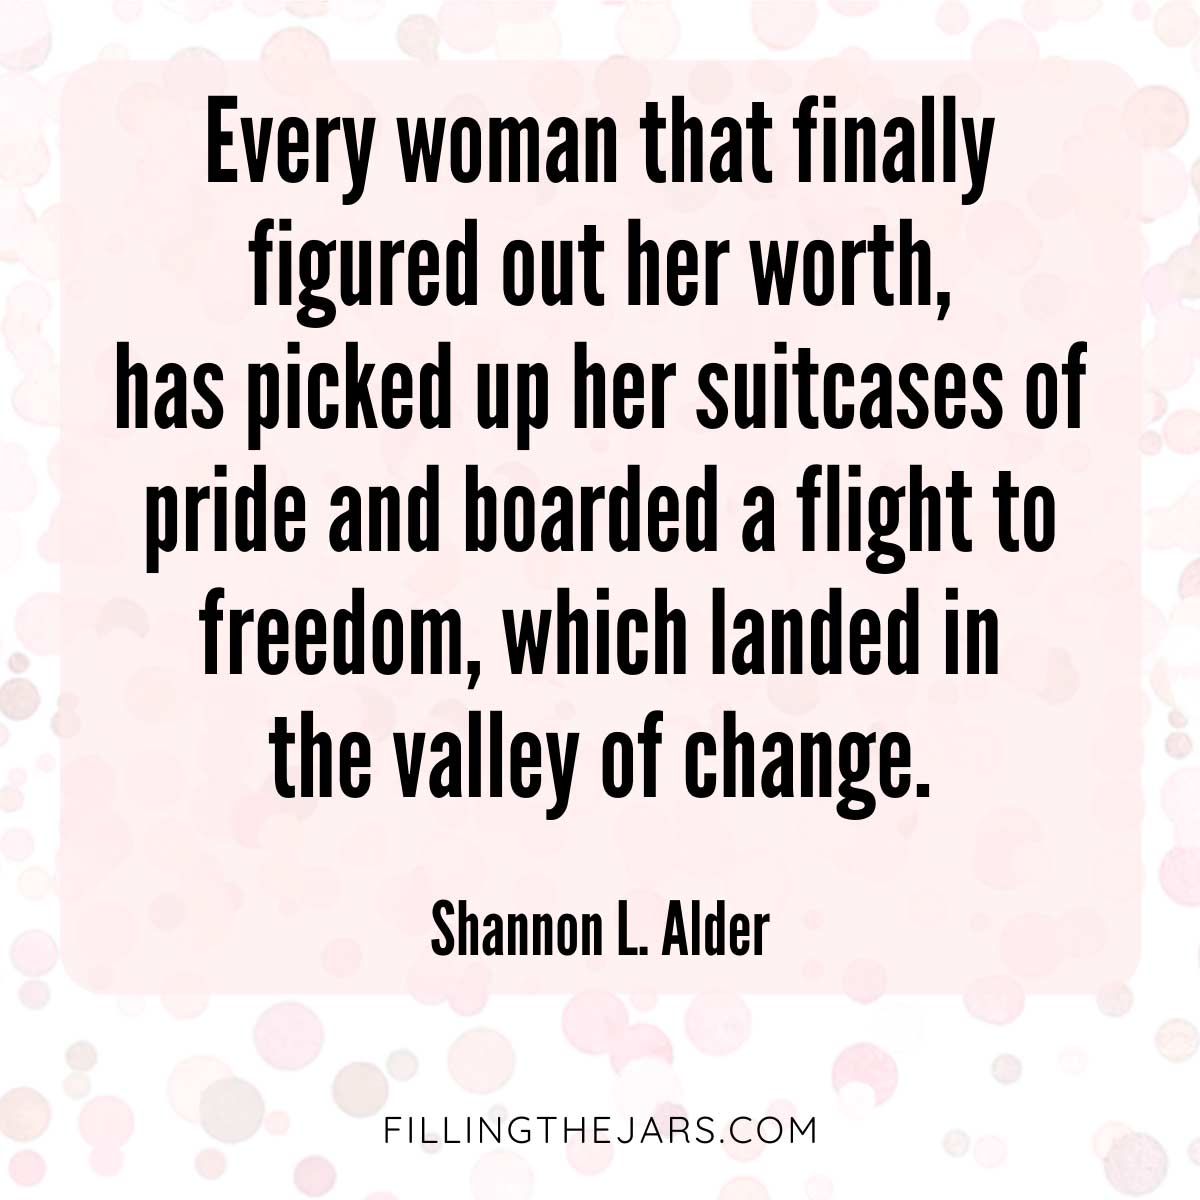 Shannon Alder woman self worth quote in black text on pink background over multi-pink confetti circles.